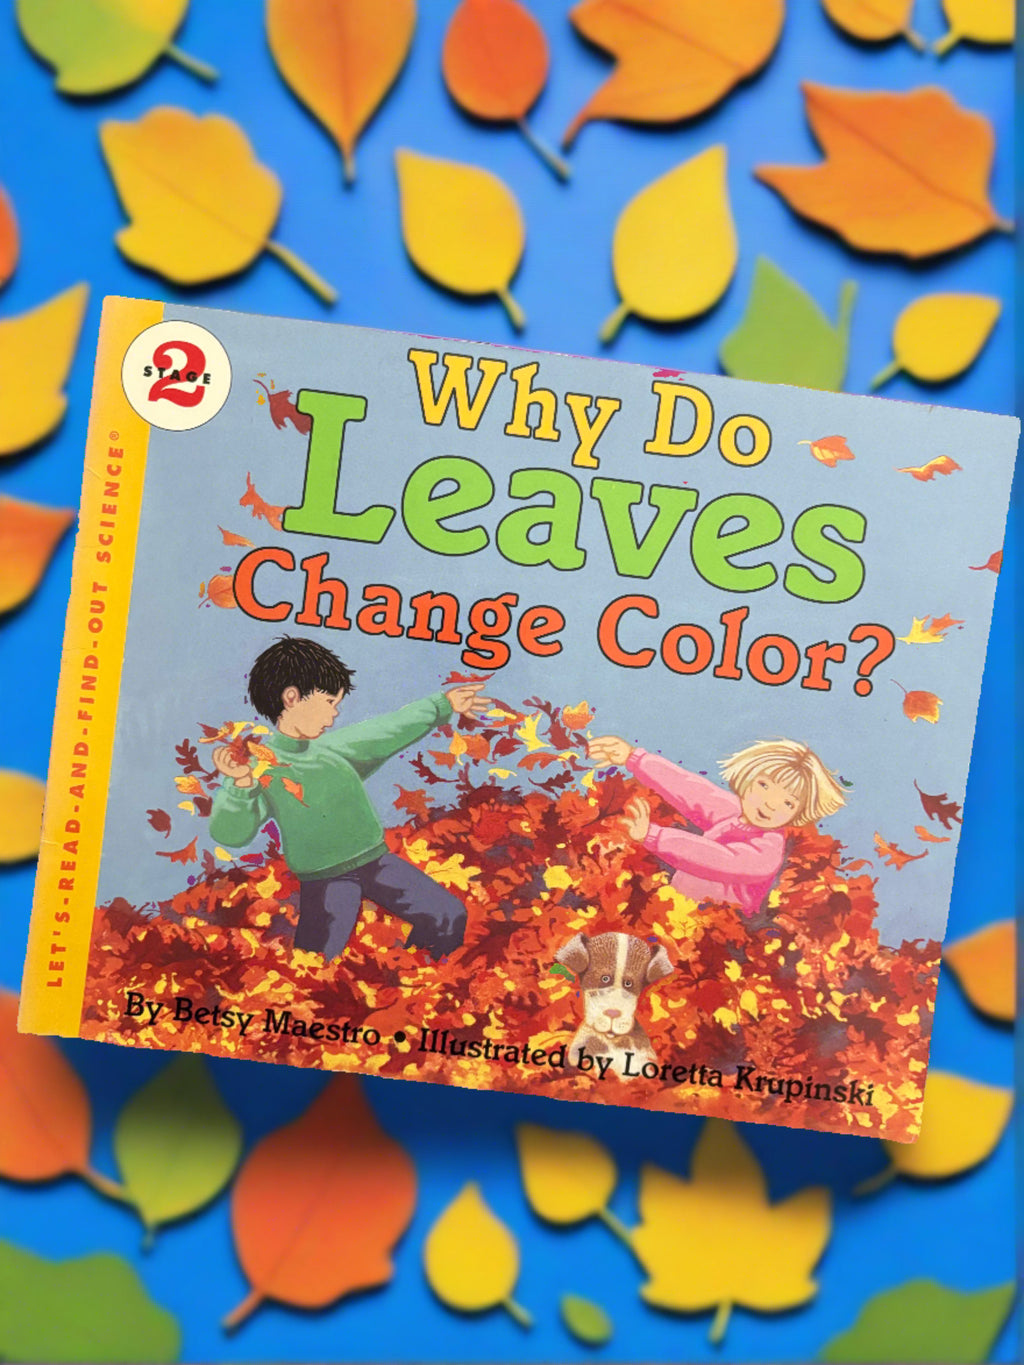 Why Do Leaves Change Color?- By Betsy Maestro